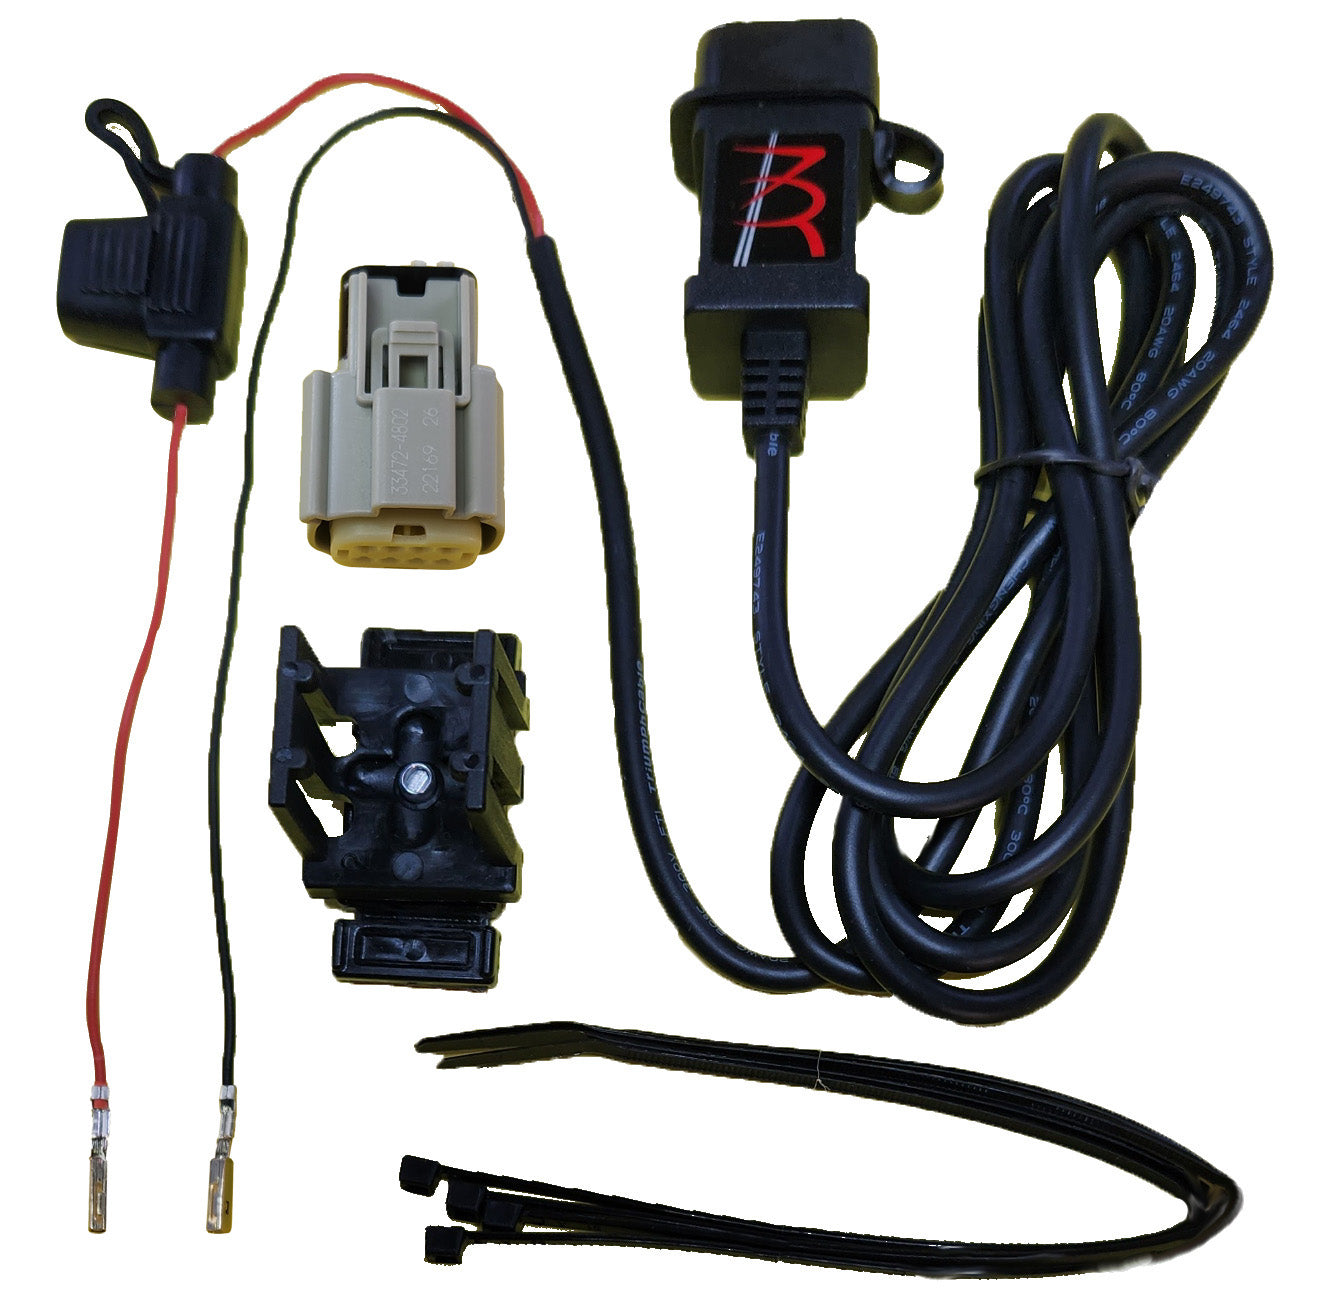 TAPP-HD All-weather USB power port for Harley Davidson Touring Motorcycles